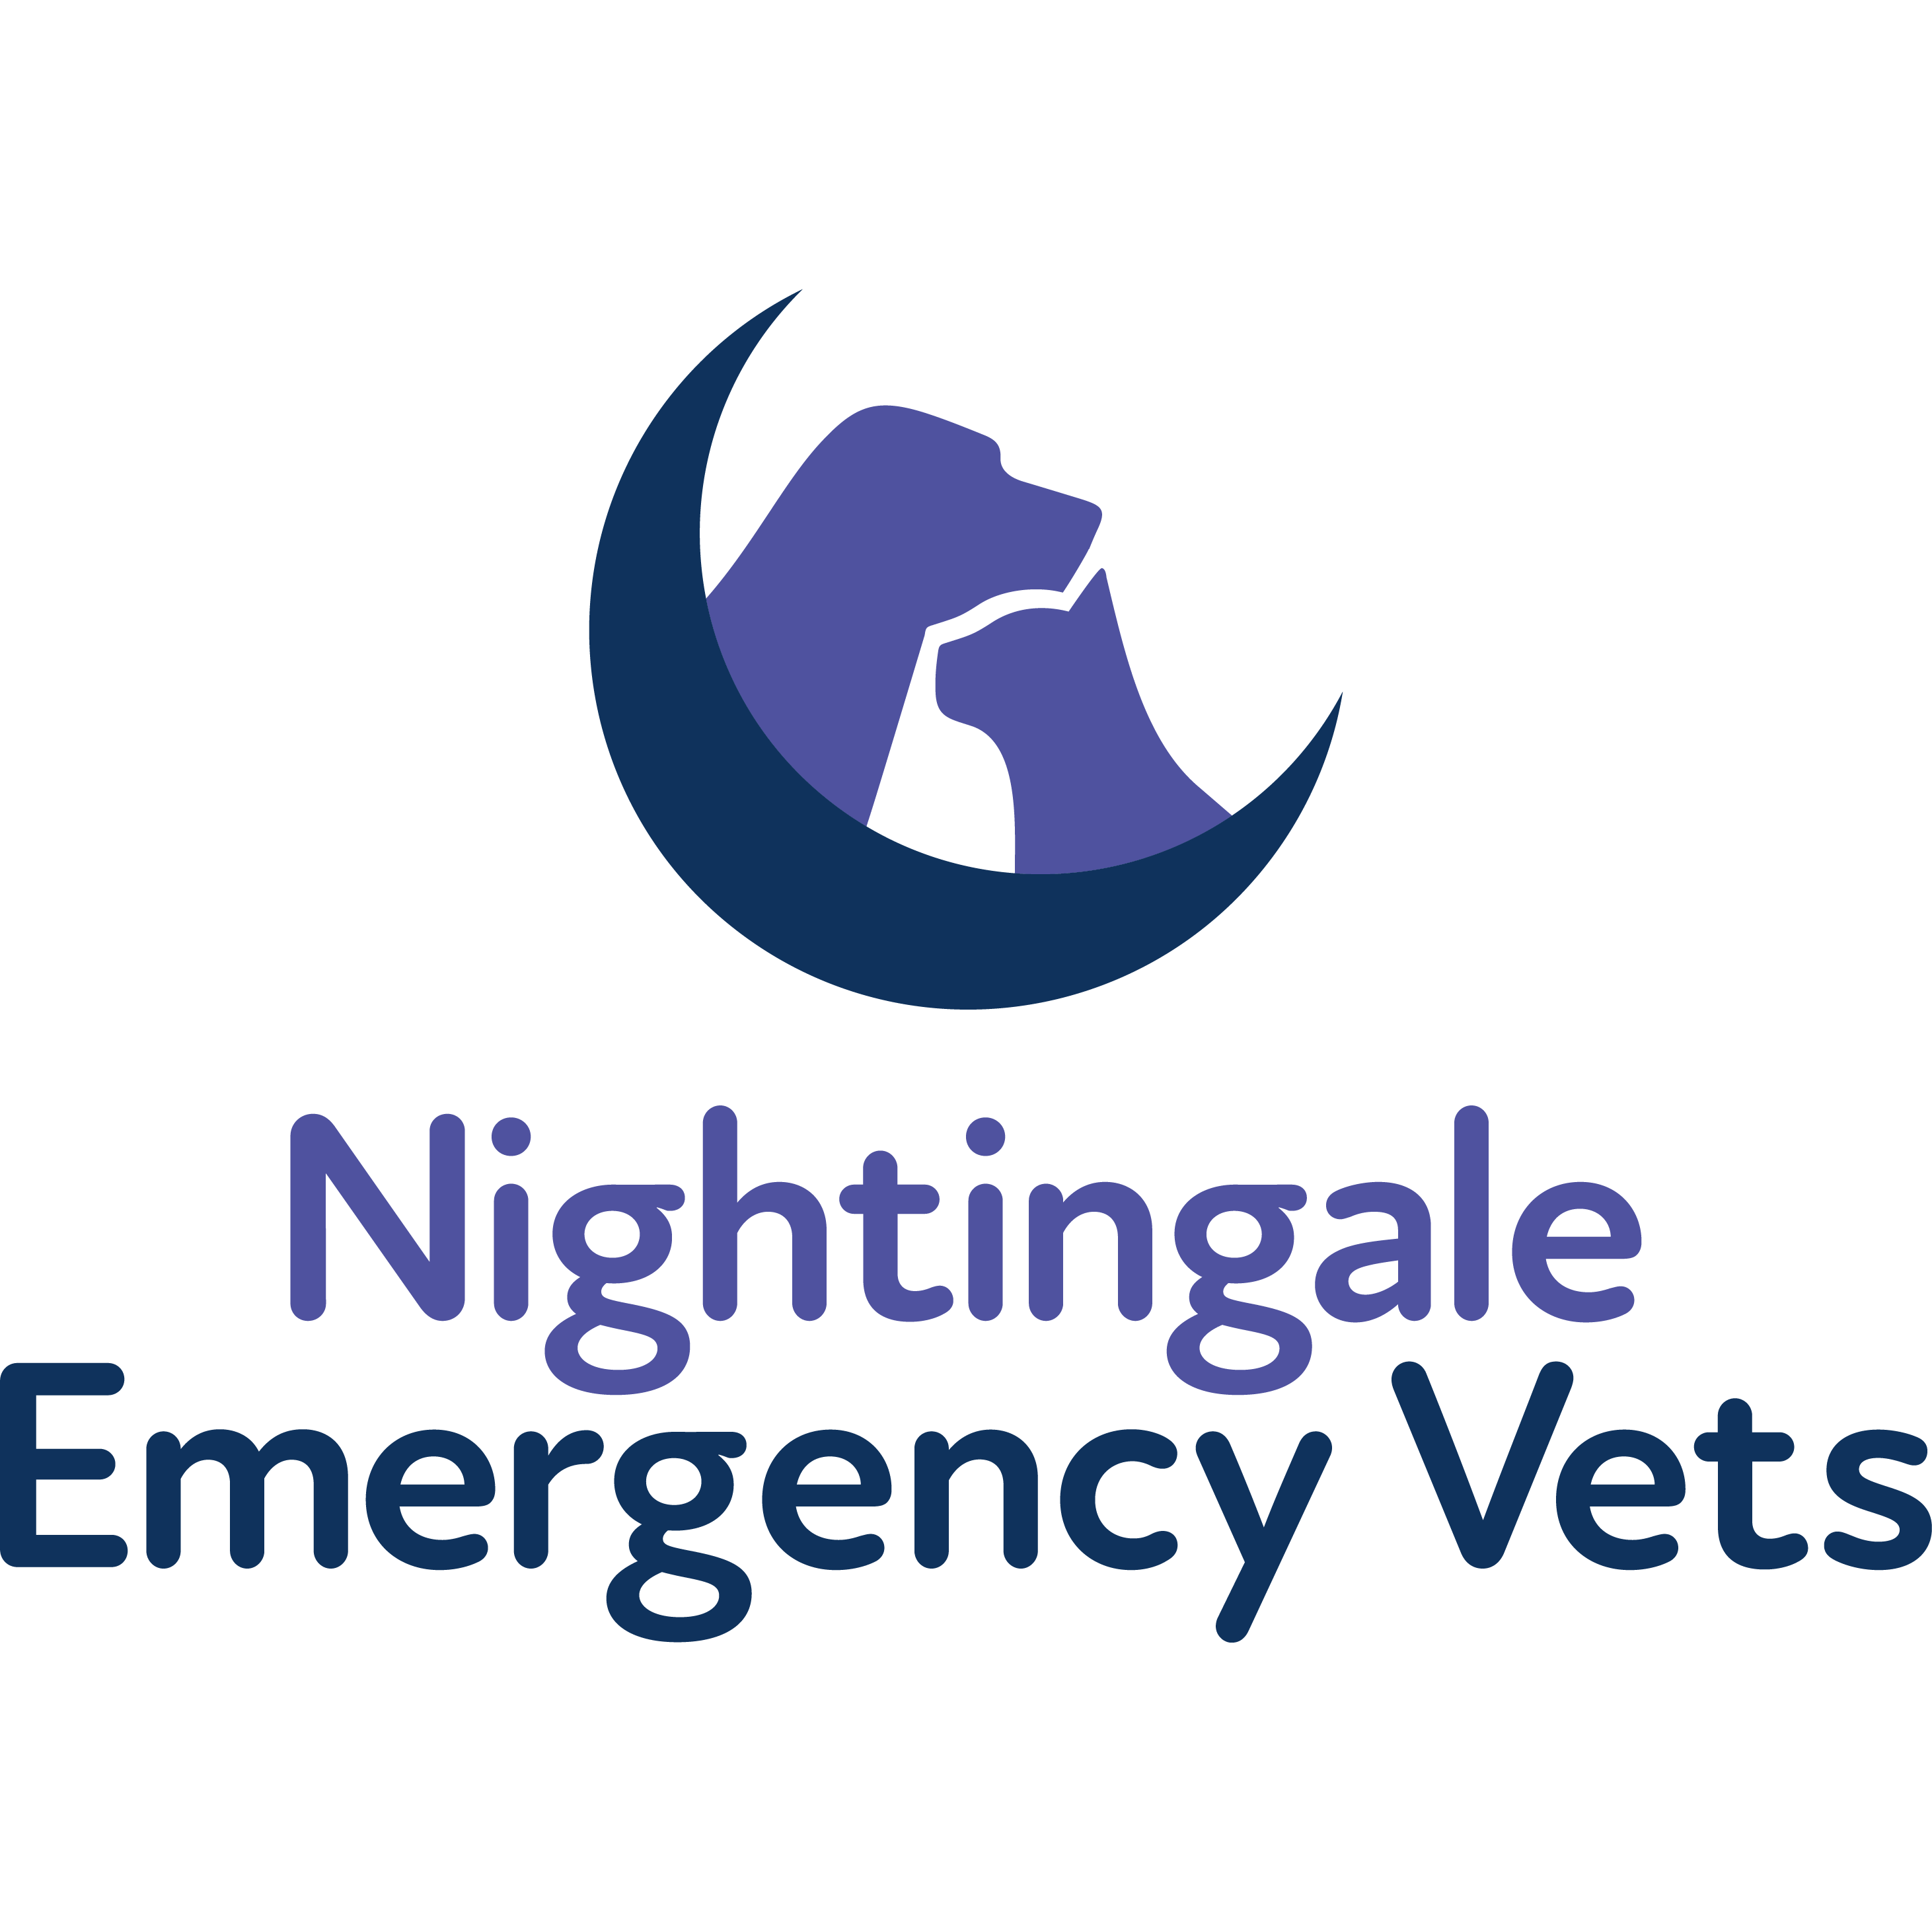 Nightingale Emergency Vets - Chippenham, Wiltshire SN15 1BS - 01249 847146 | ShowMeLocal.com